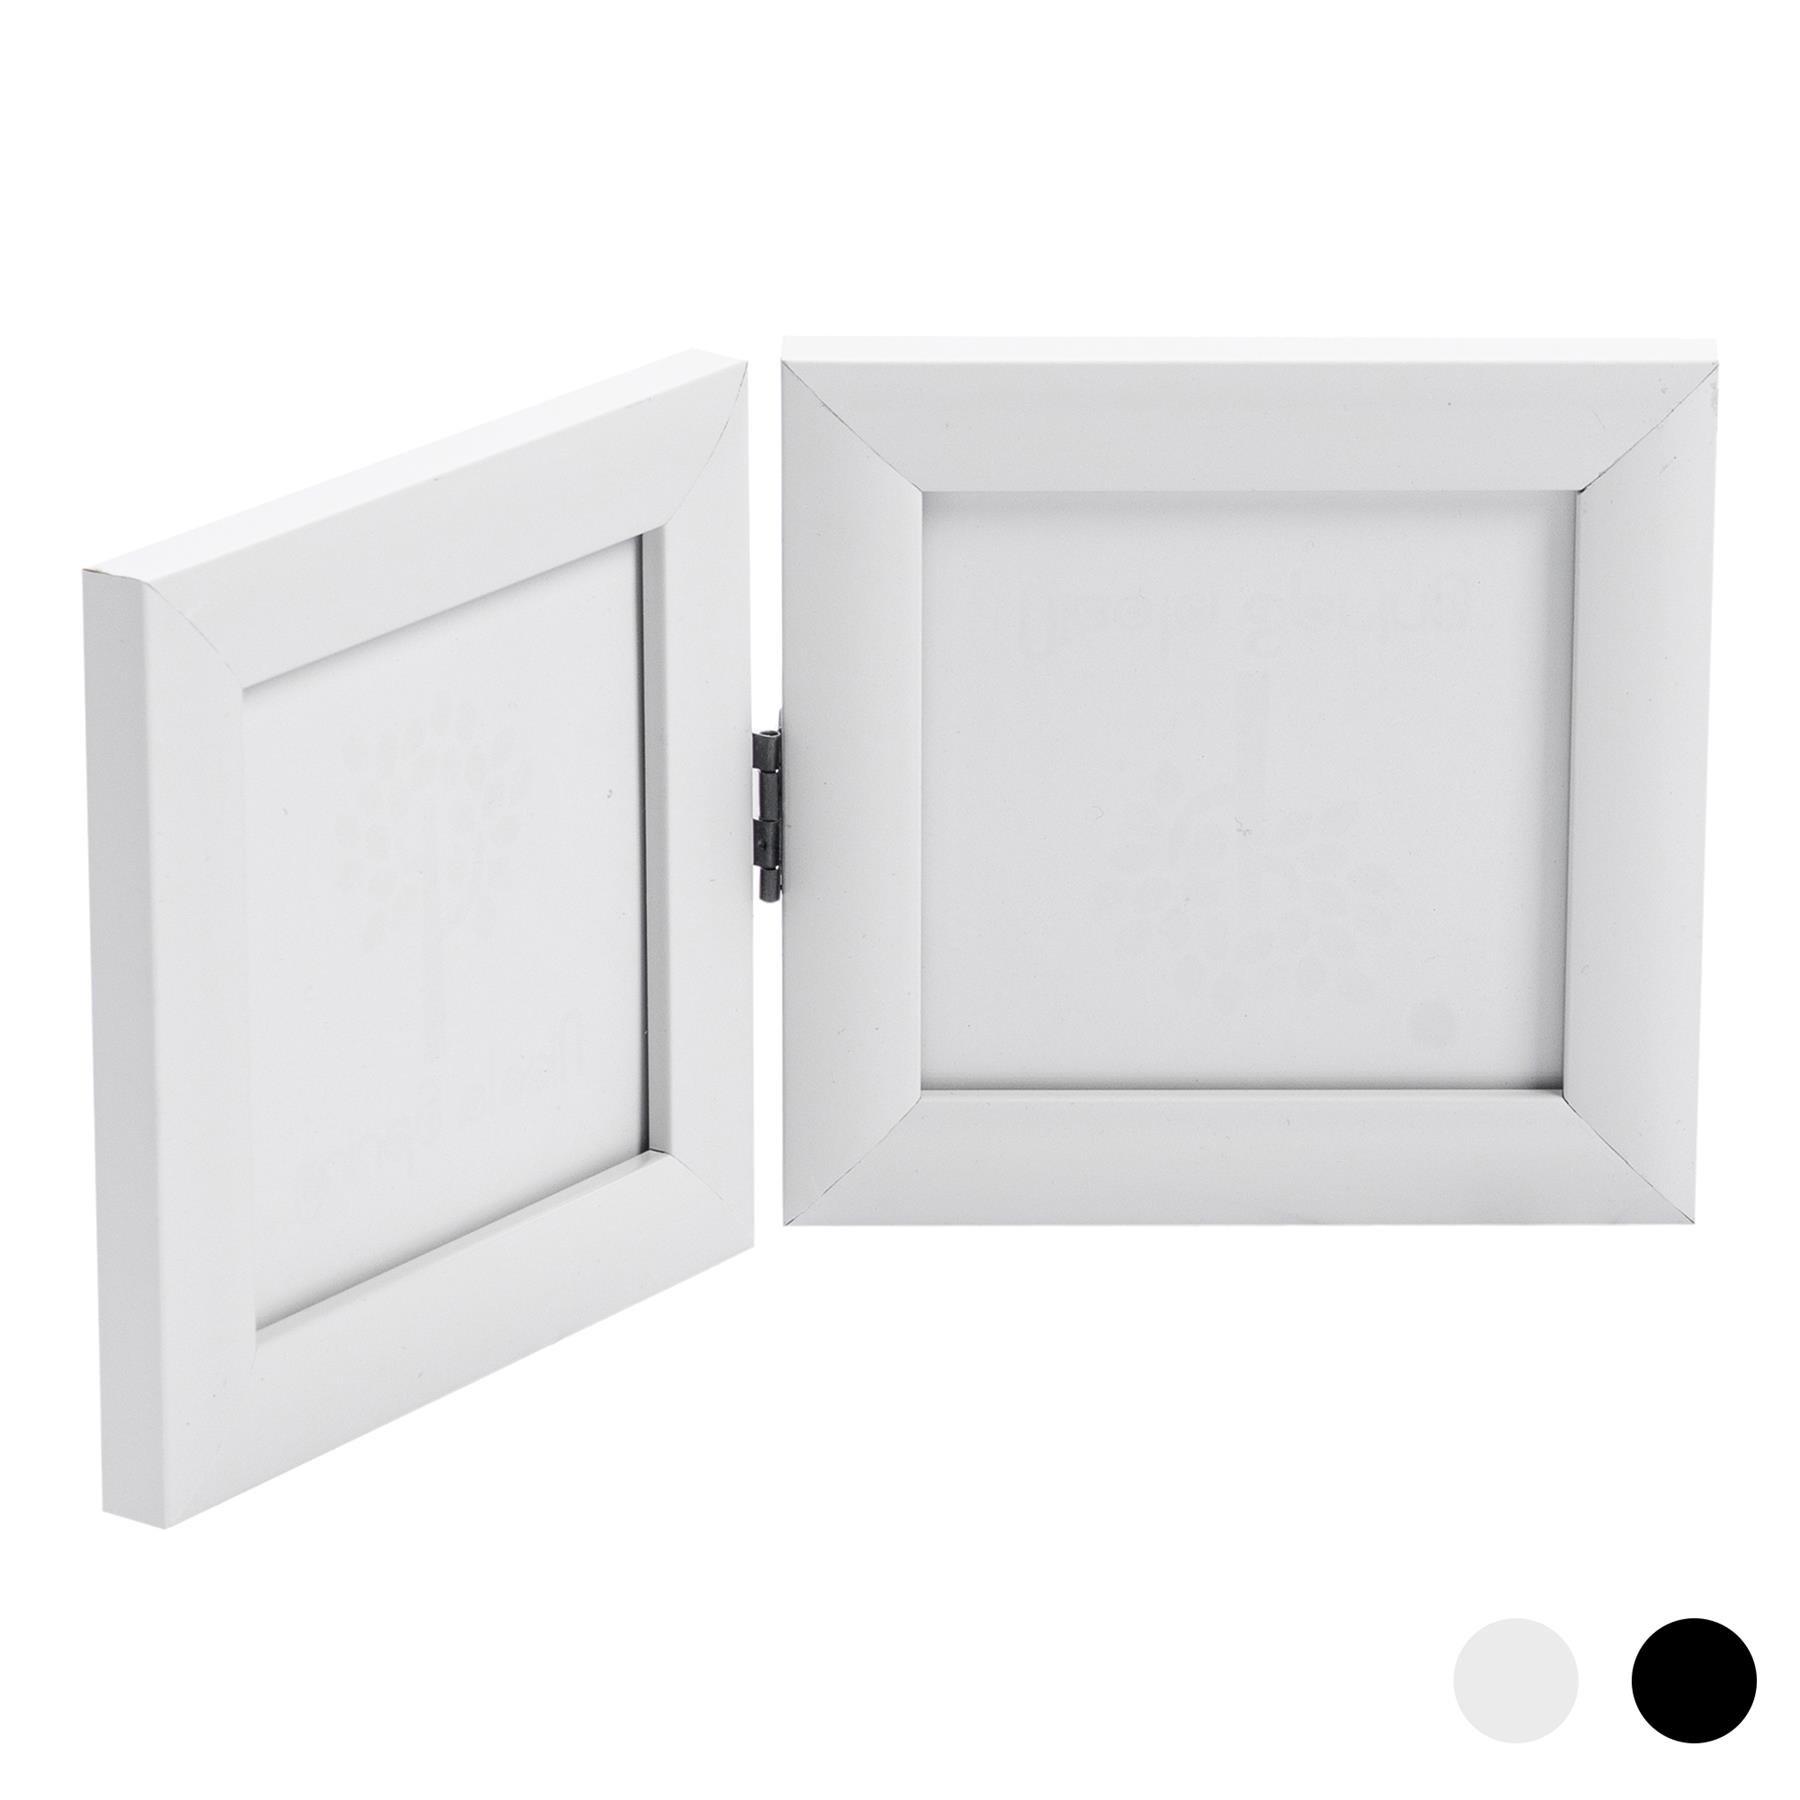 Folding Picture Frame white